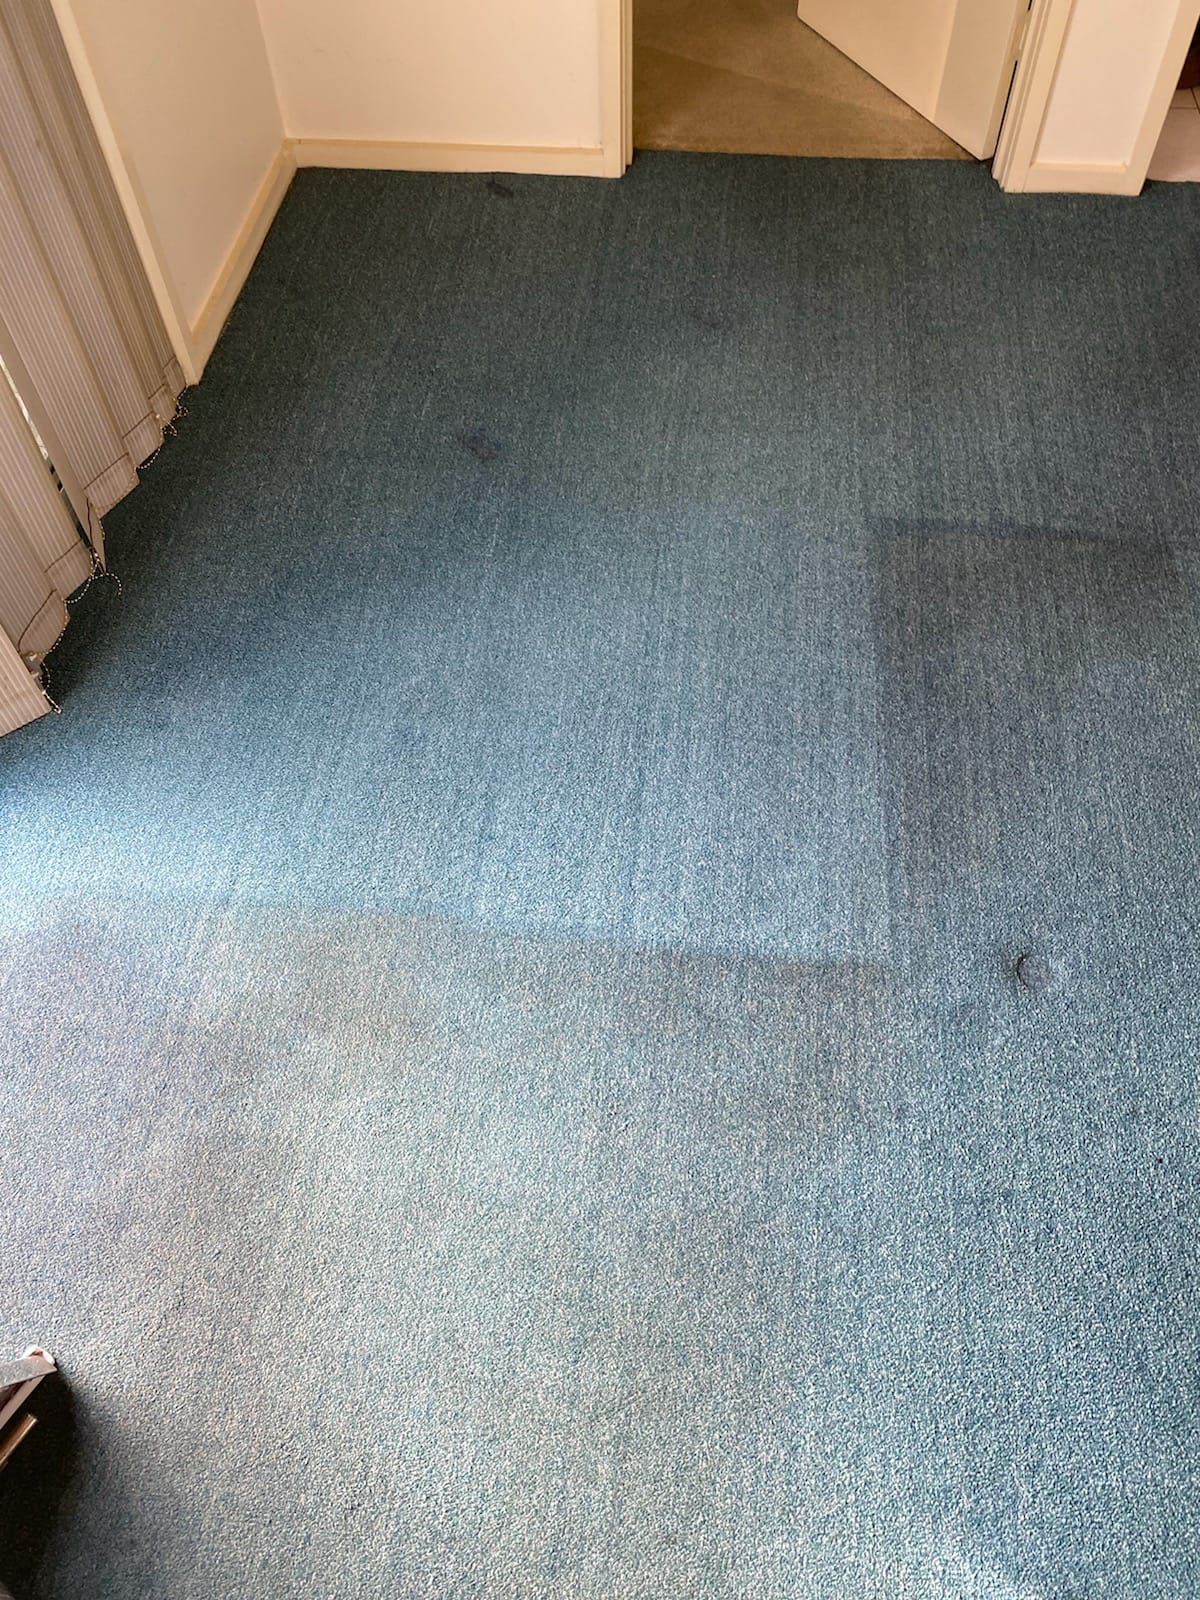 carpet cleaning (9)